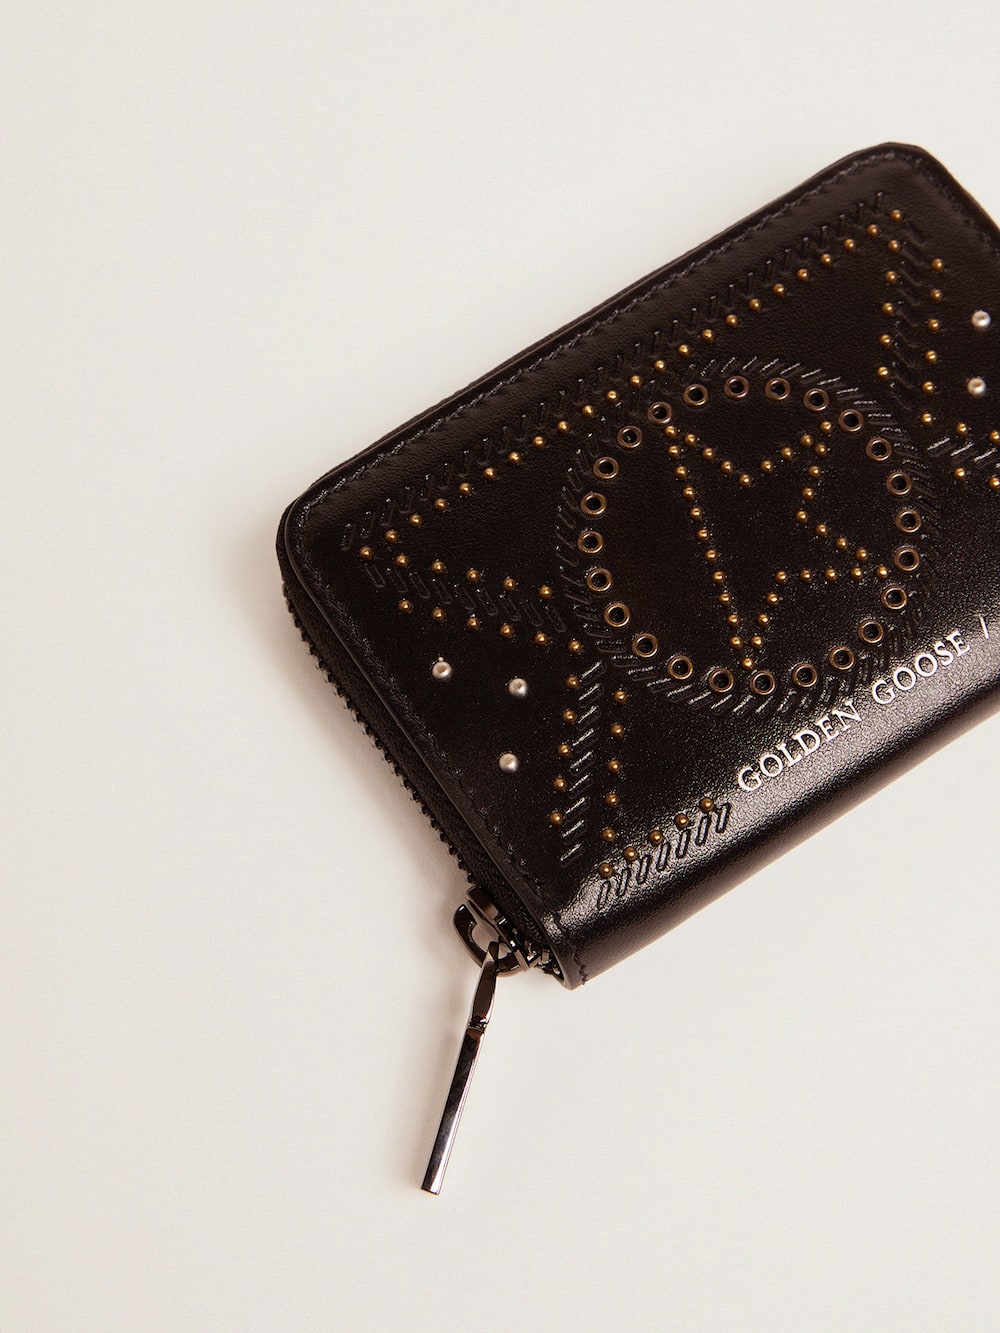 Golden Goose - Star Compact wallet in leather with studs     in 